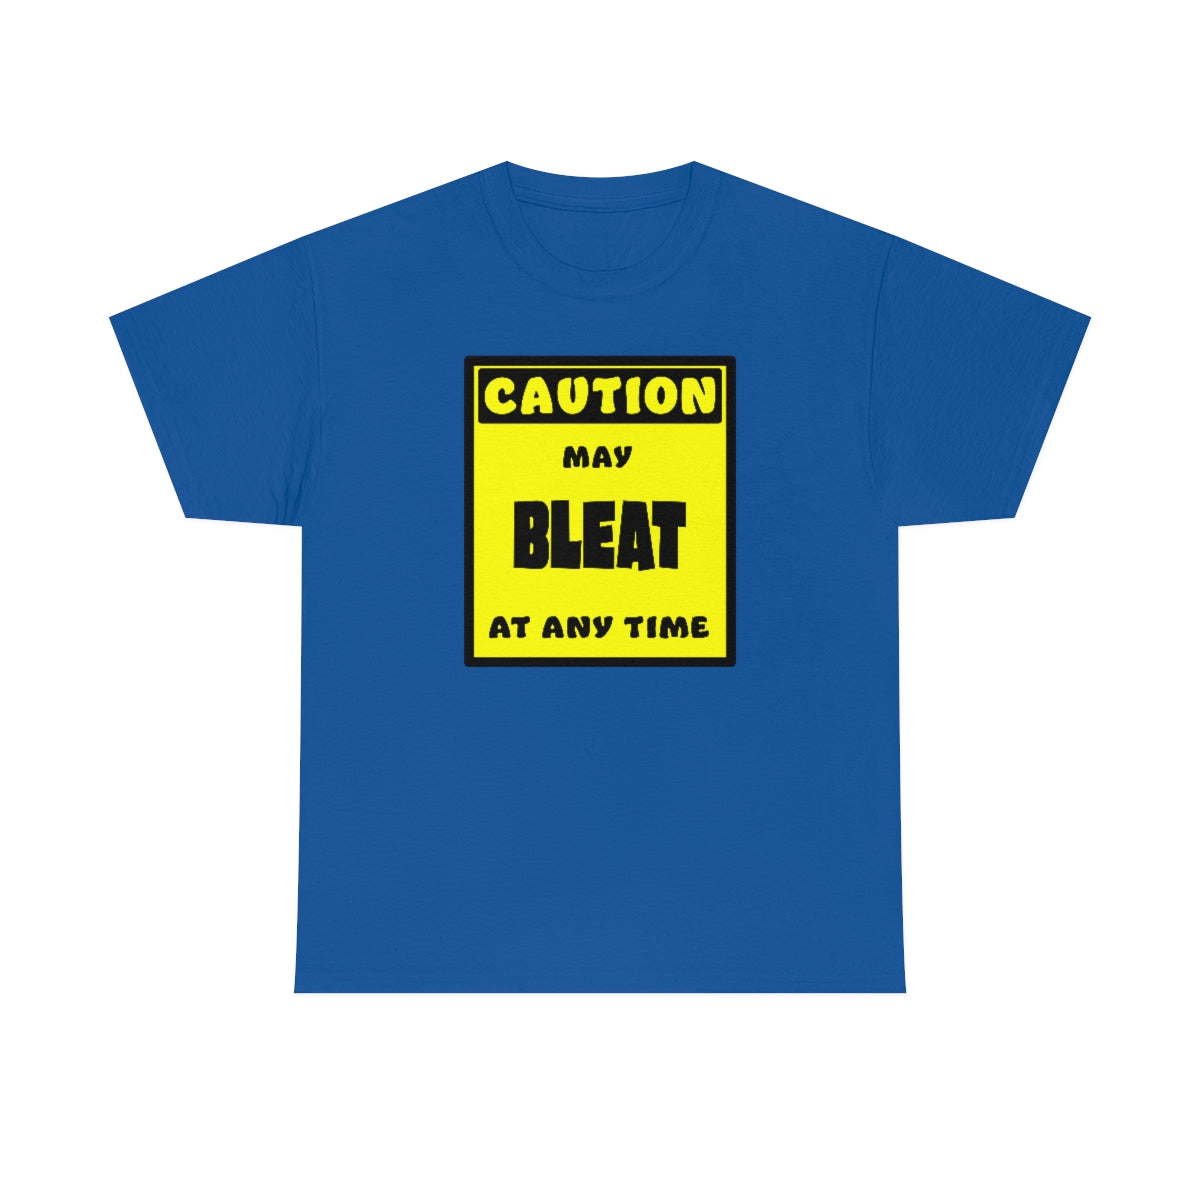 CAUTION! May BLEAT at any time! - T-Shirt T-Shirt AFLT-Whootorca Royal Blue S 